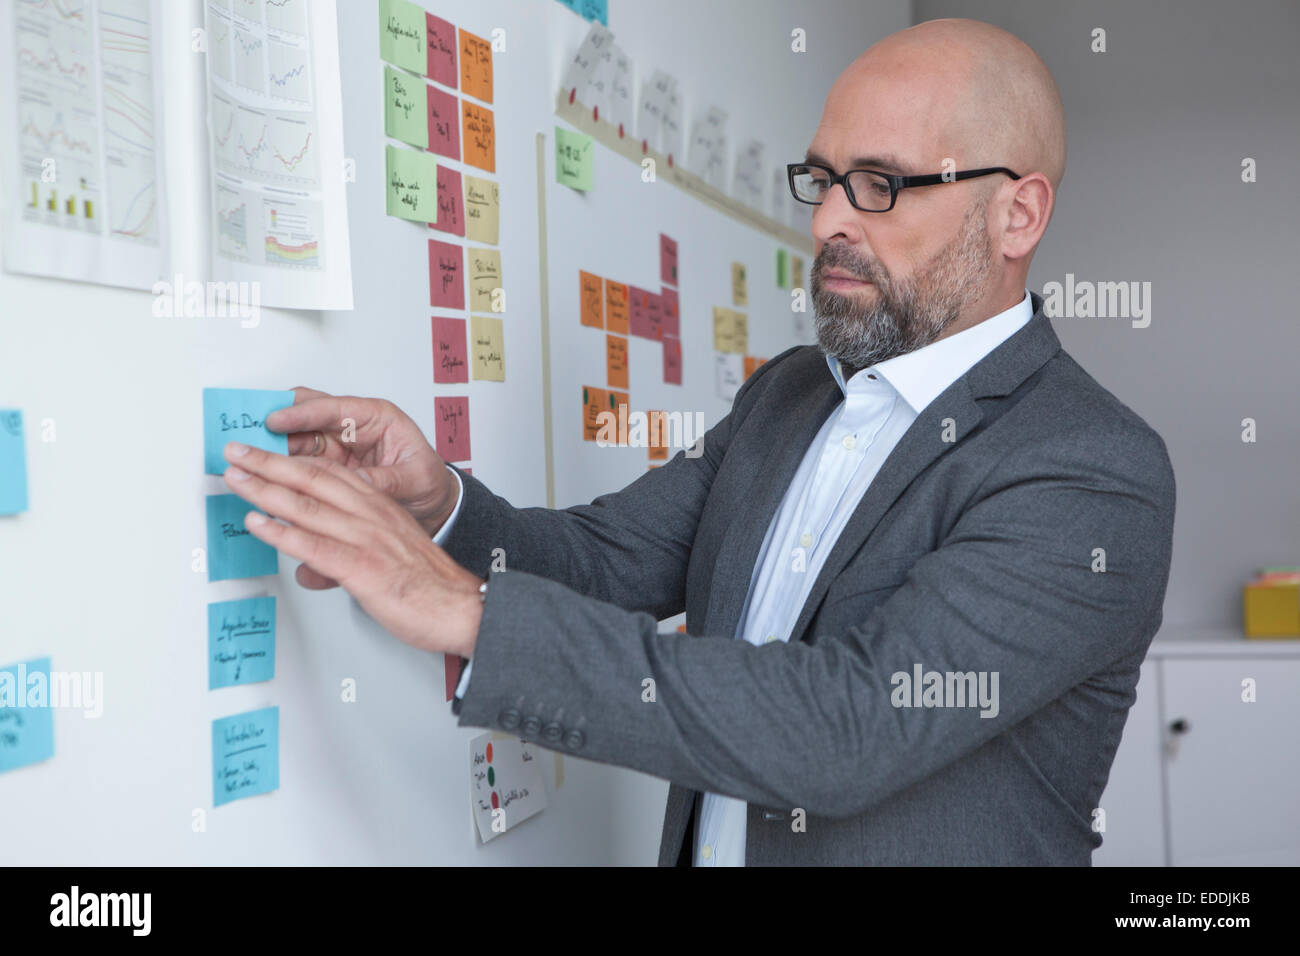 Businessman in office at wall with adhesive notes Stock Photo